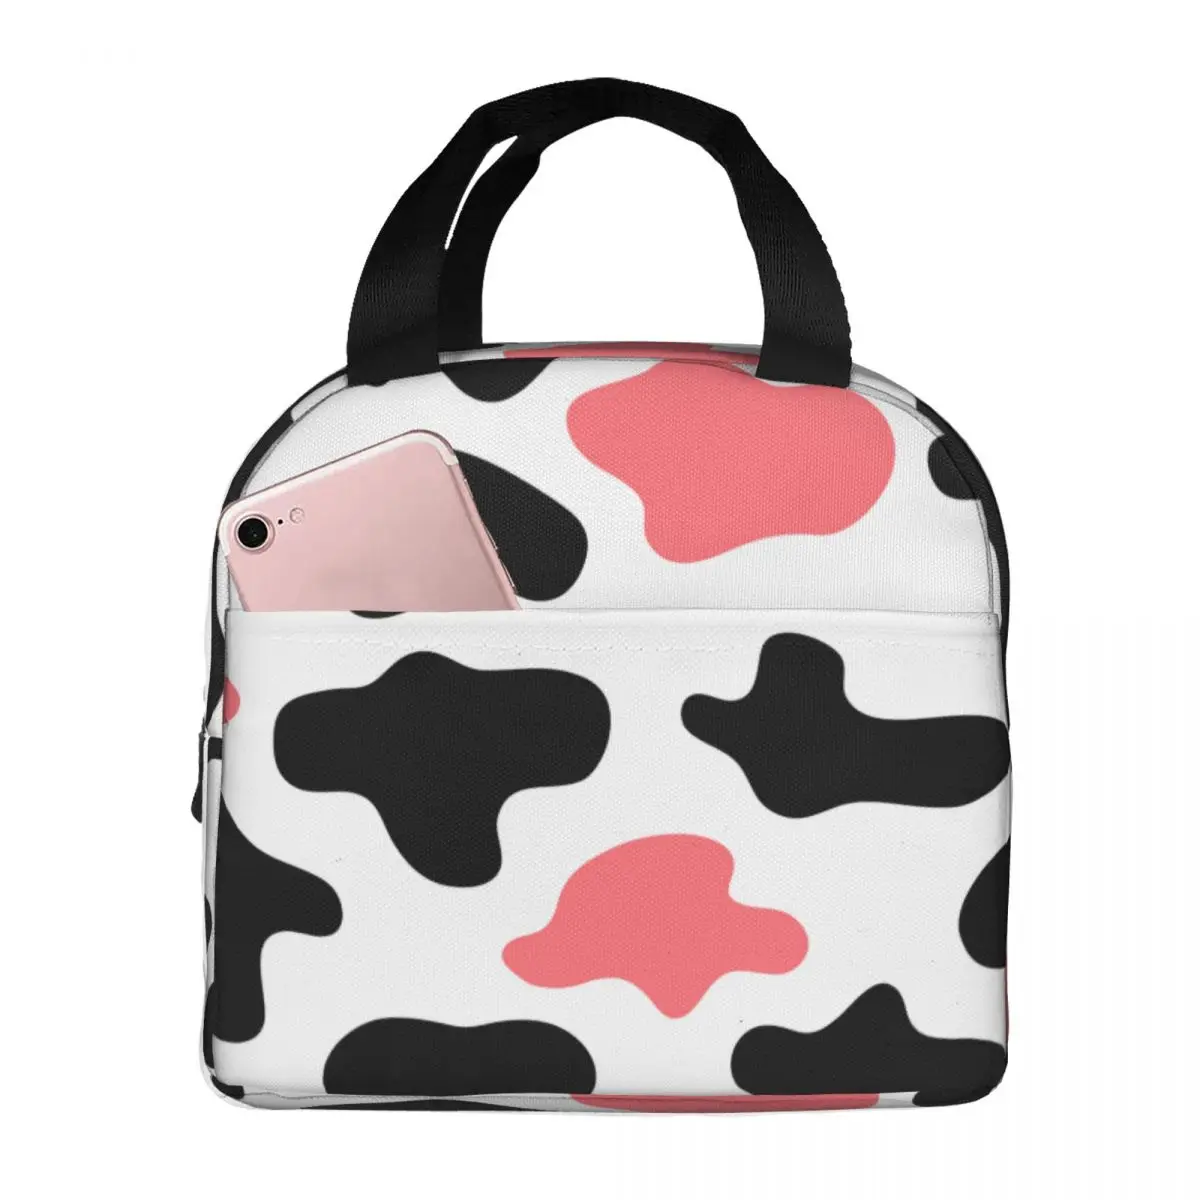 Lunch Bags for Men Women White Black Pink Cow Spots Thermal Cooler Waterproof School Canvas Lunch Box Handbags